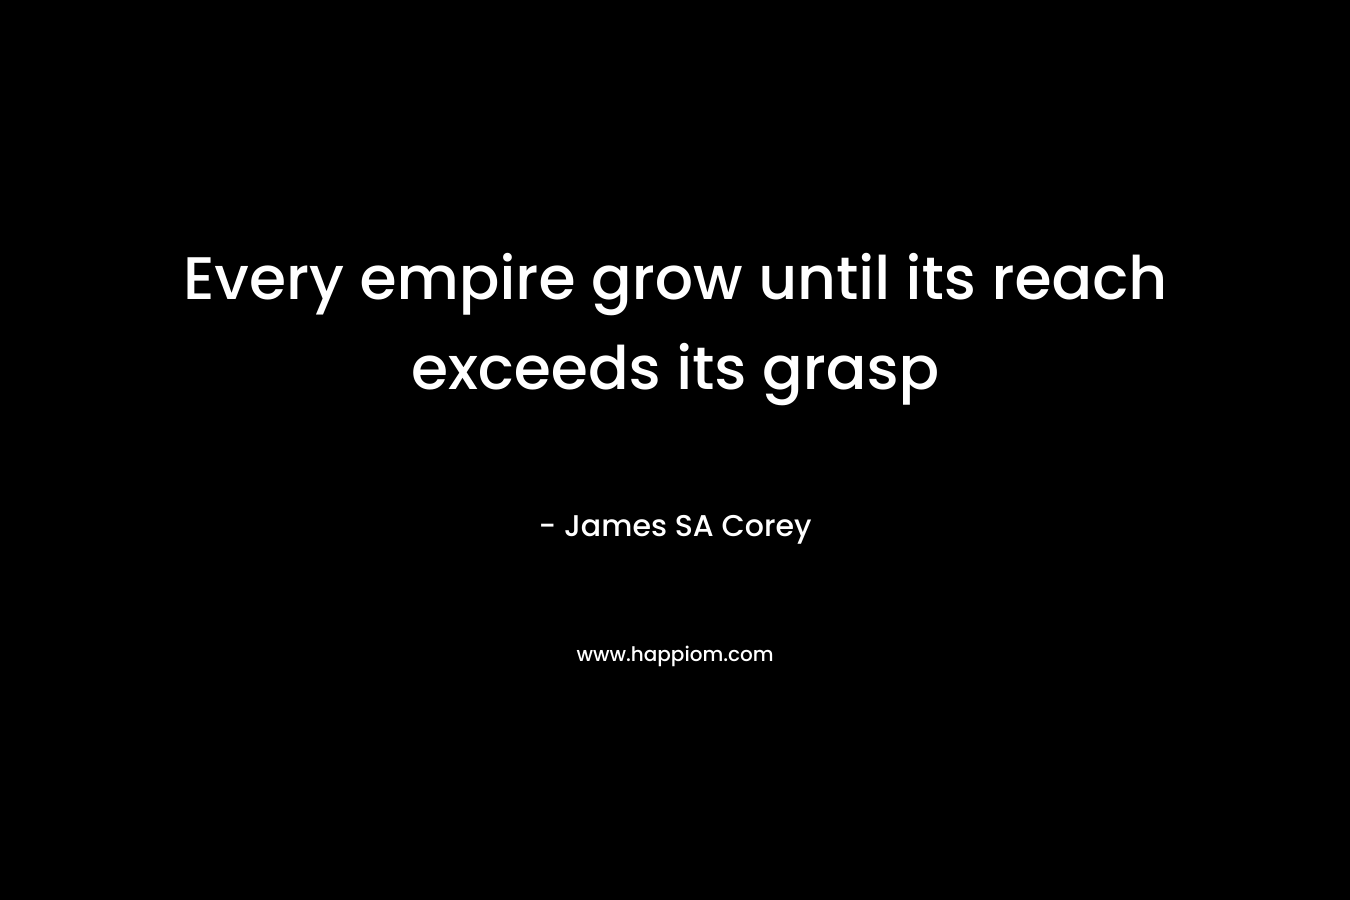 Every empire grow until its reach exceeds its grasp